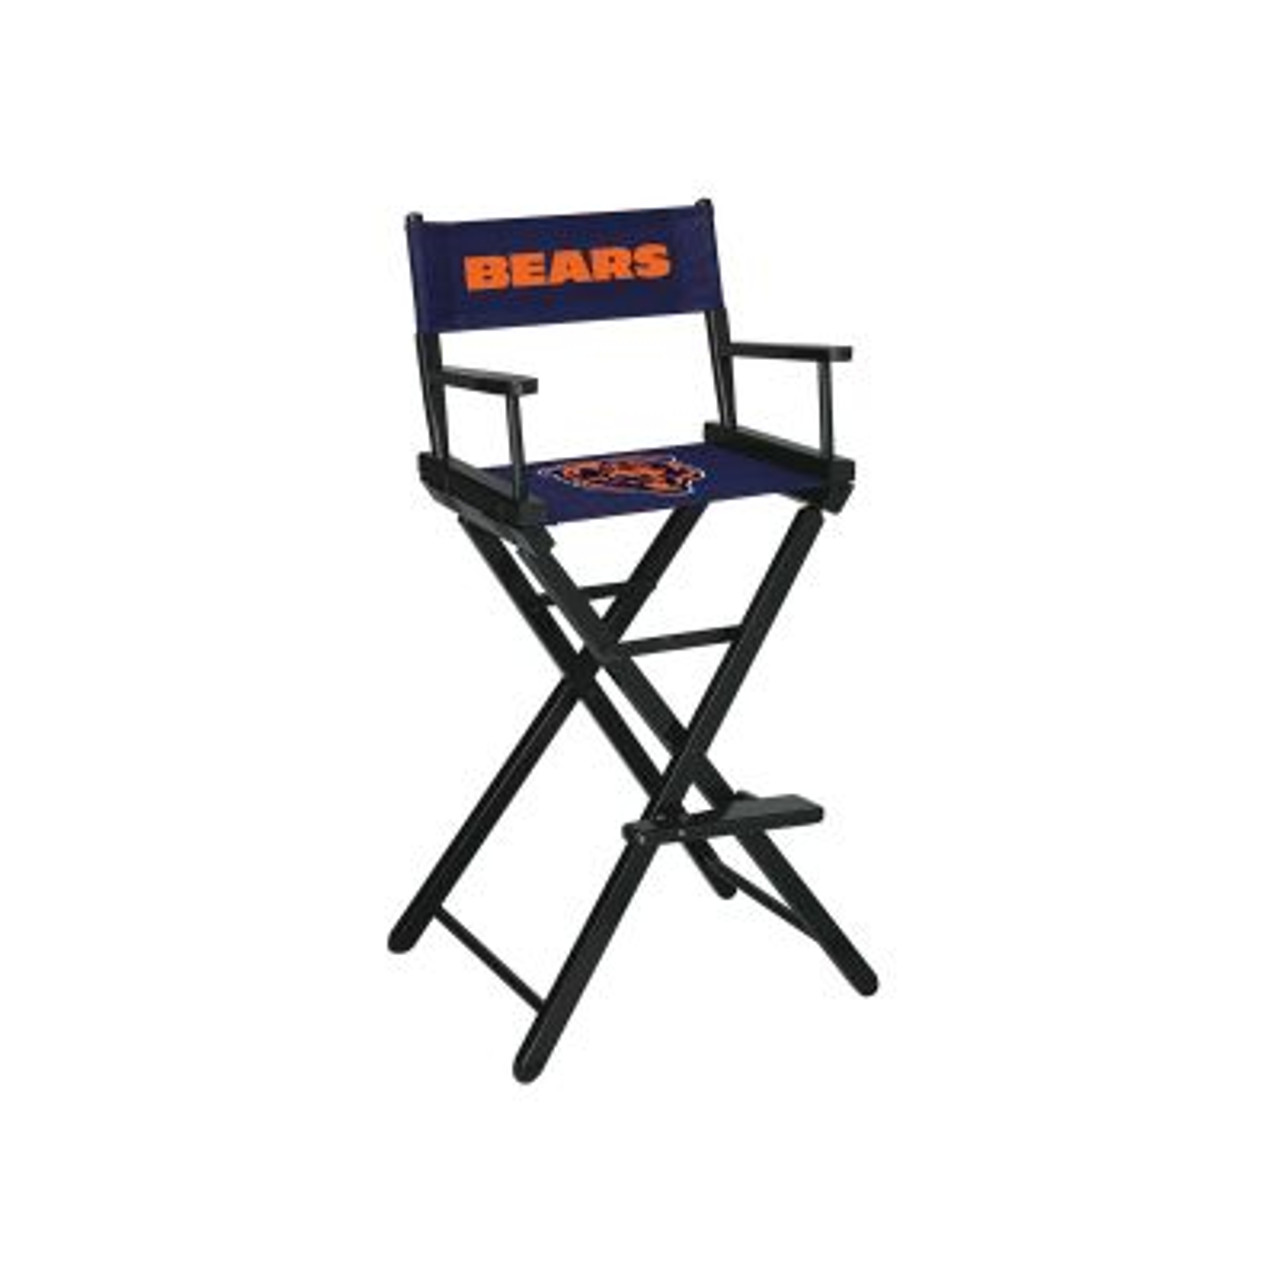 100-1019, Chicago, Bears, NFL, Bar, Height, Directors Chair, FREE SHIPPING, Imperial